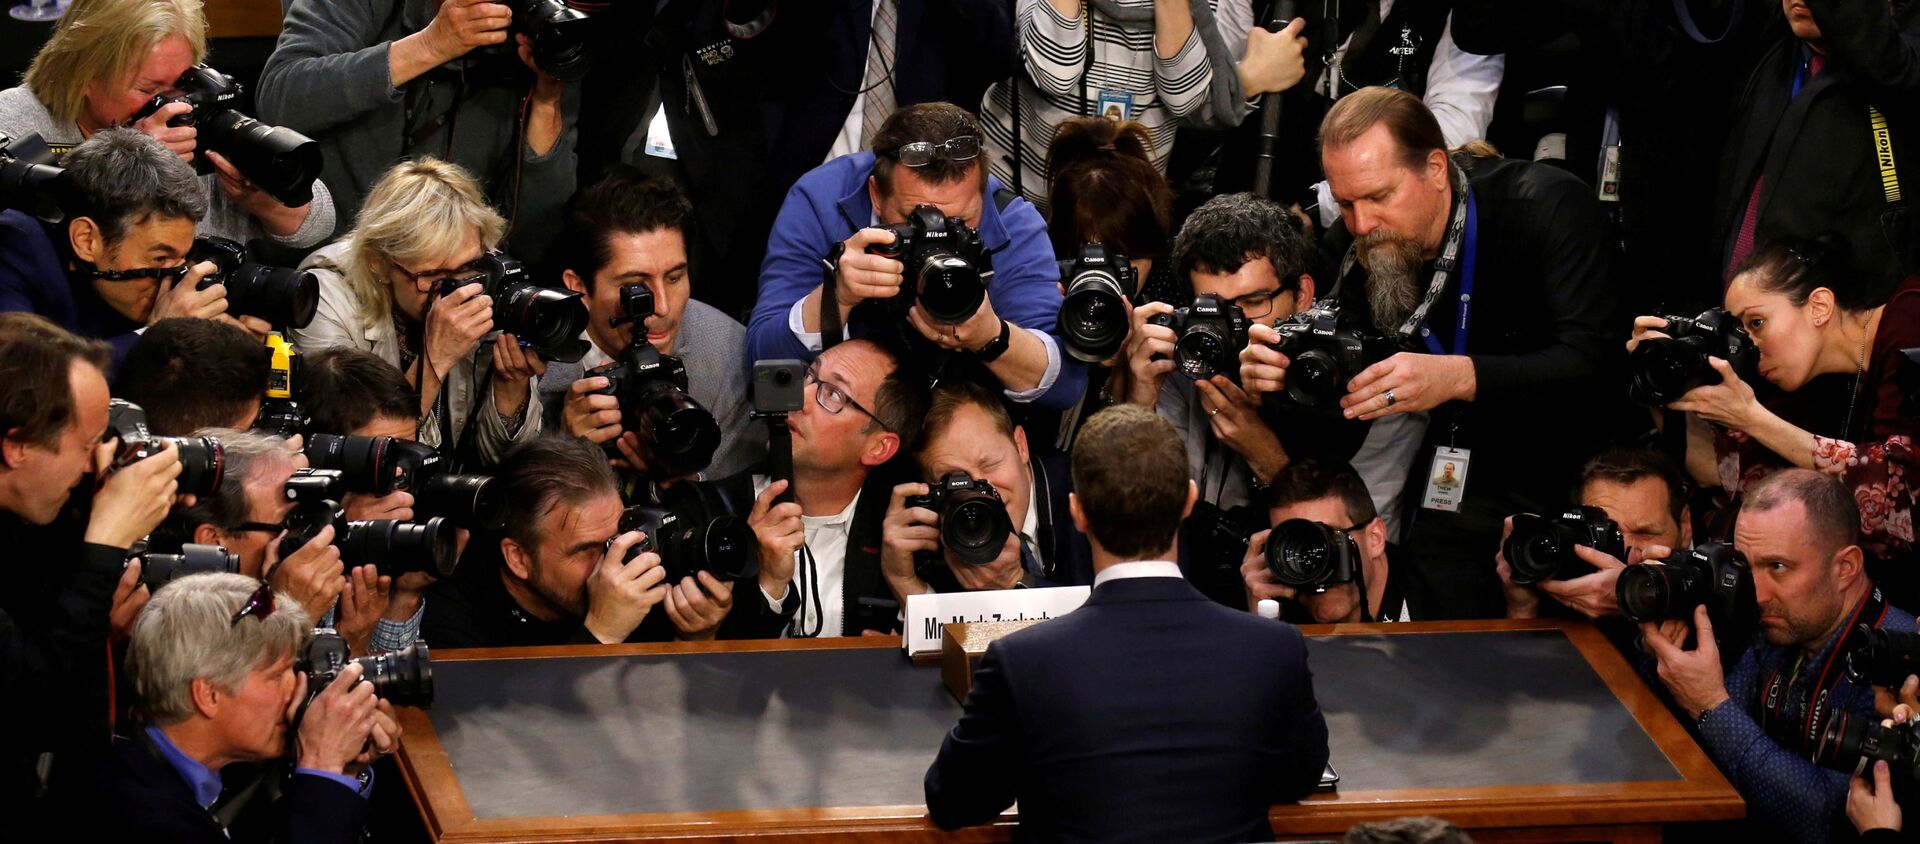 Facebook CEO Mark Zuckerberg is surrounded by members of the media as he arrives to testify before a Senate Judiciary - Sputnik International, 1920, 28.01.2021